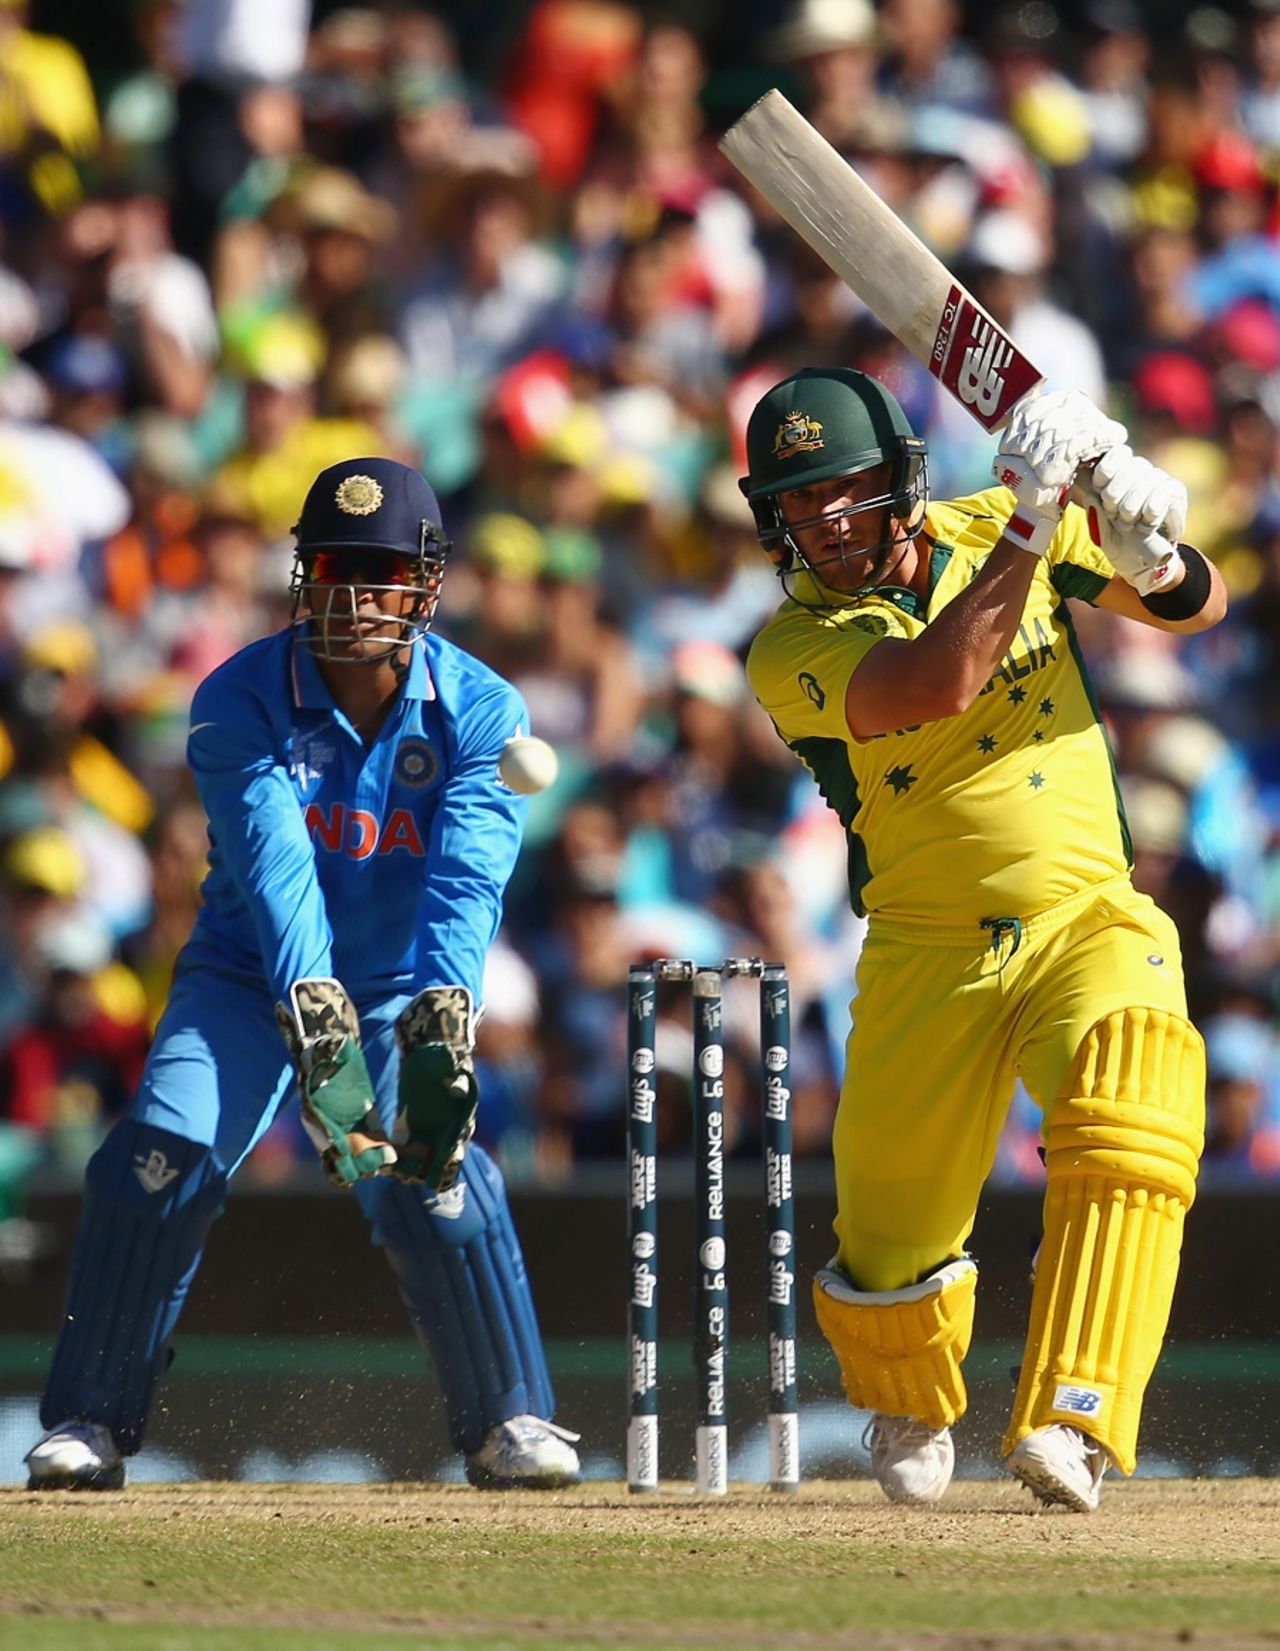 Aaron Finch hits down the ground, Australia v India, World Cup 2015, 2nd semi-final, Sydney, March 26, 2015